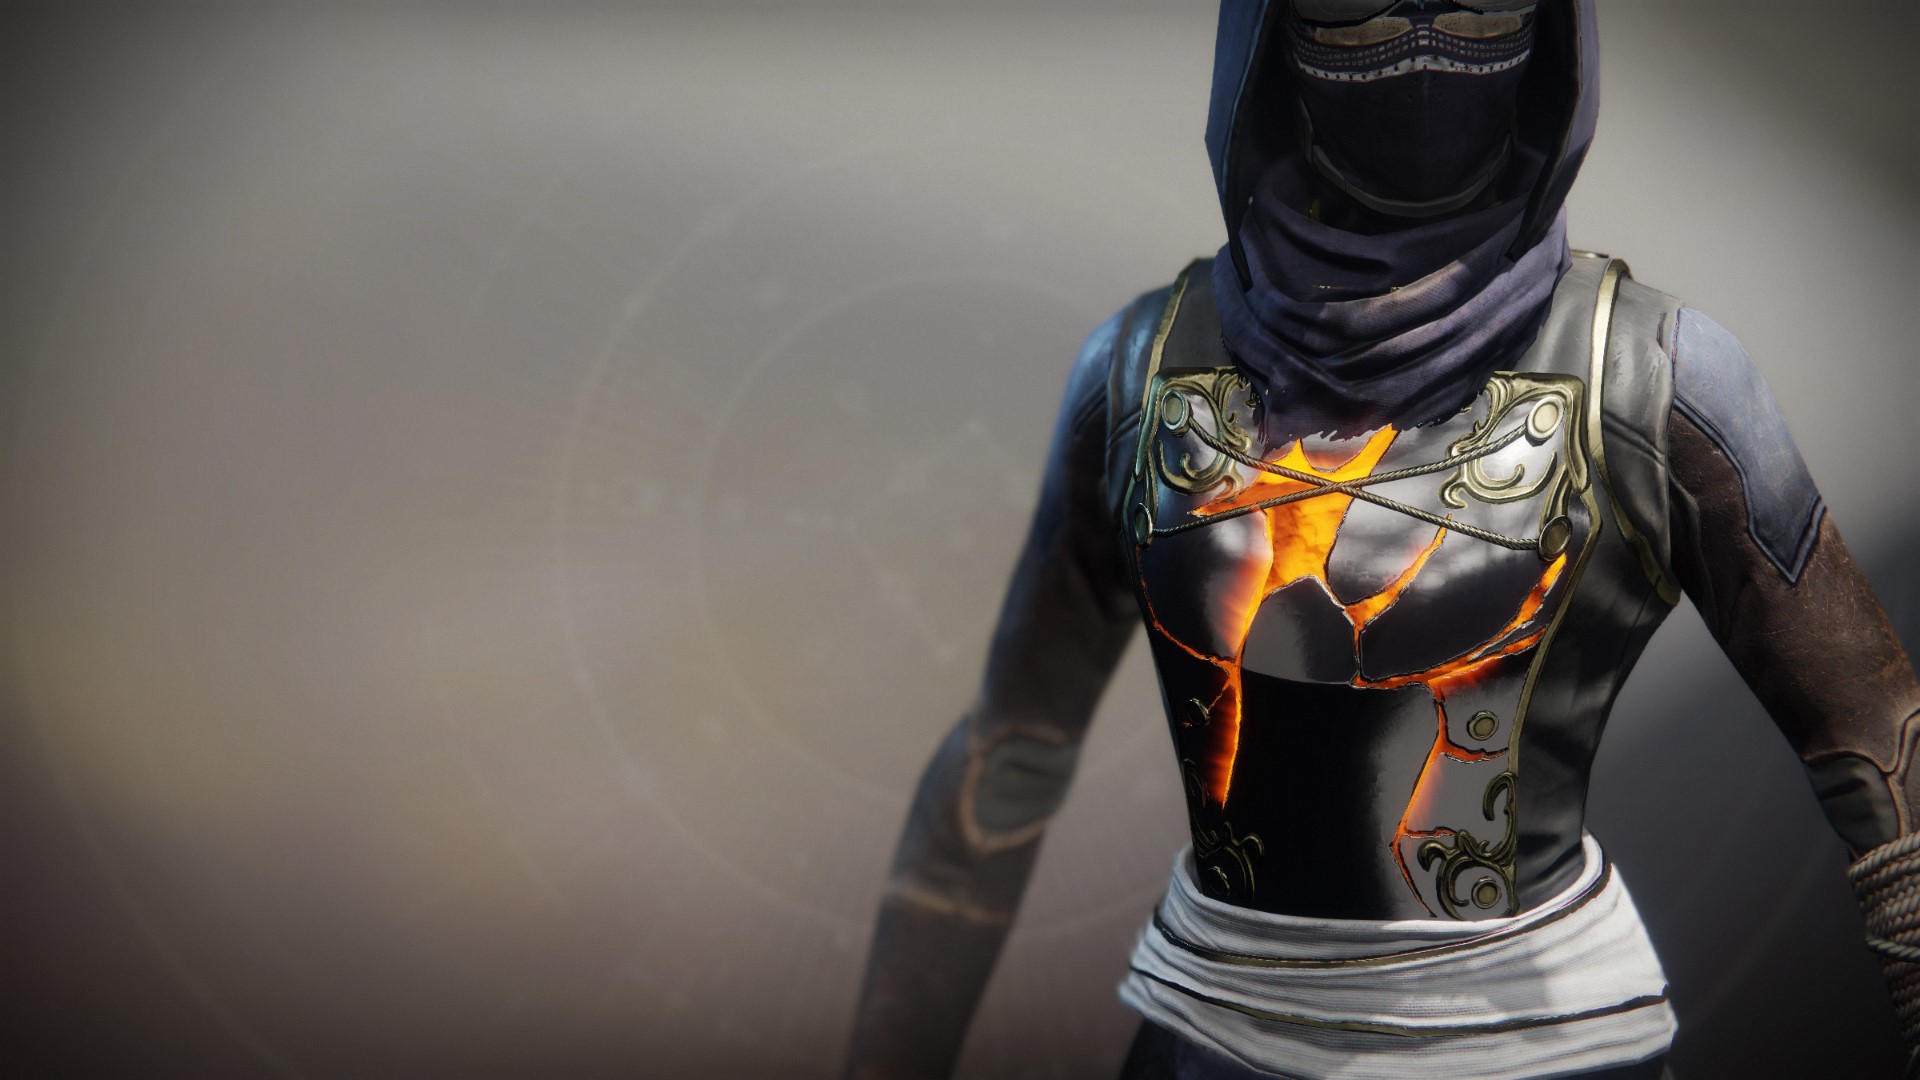 An in-game render of the Solstice Vest (Magnificent).